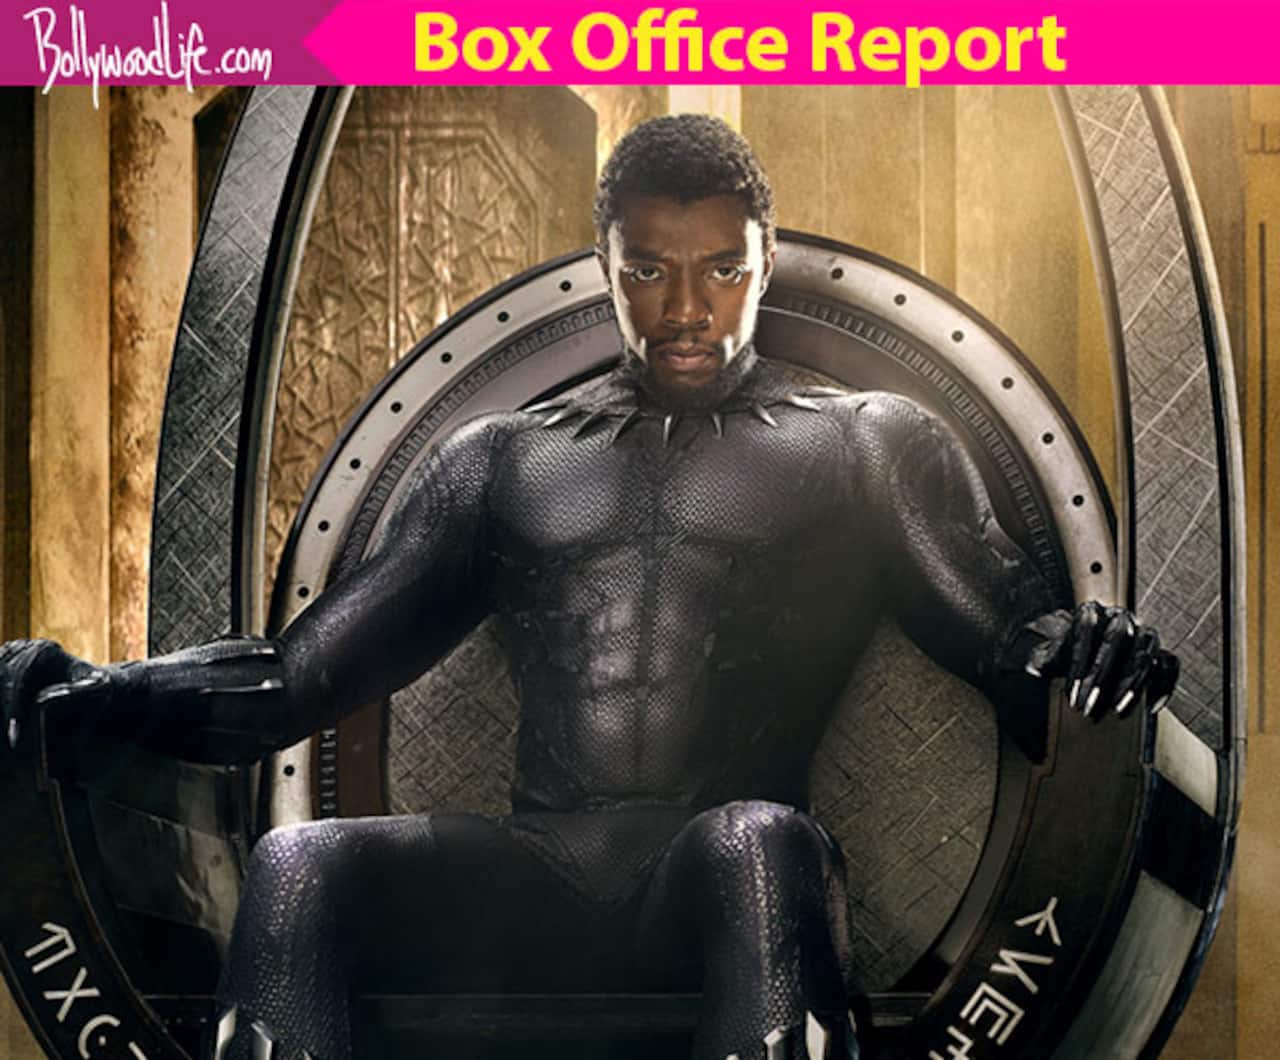 Marvel's Black Panther rakes in $67 million at the China box office over  the first weekend - Bollywood News & Gossip, Movie Reviews, Trailers &  Videos at 